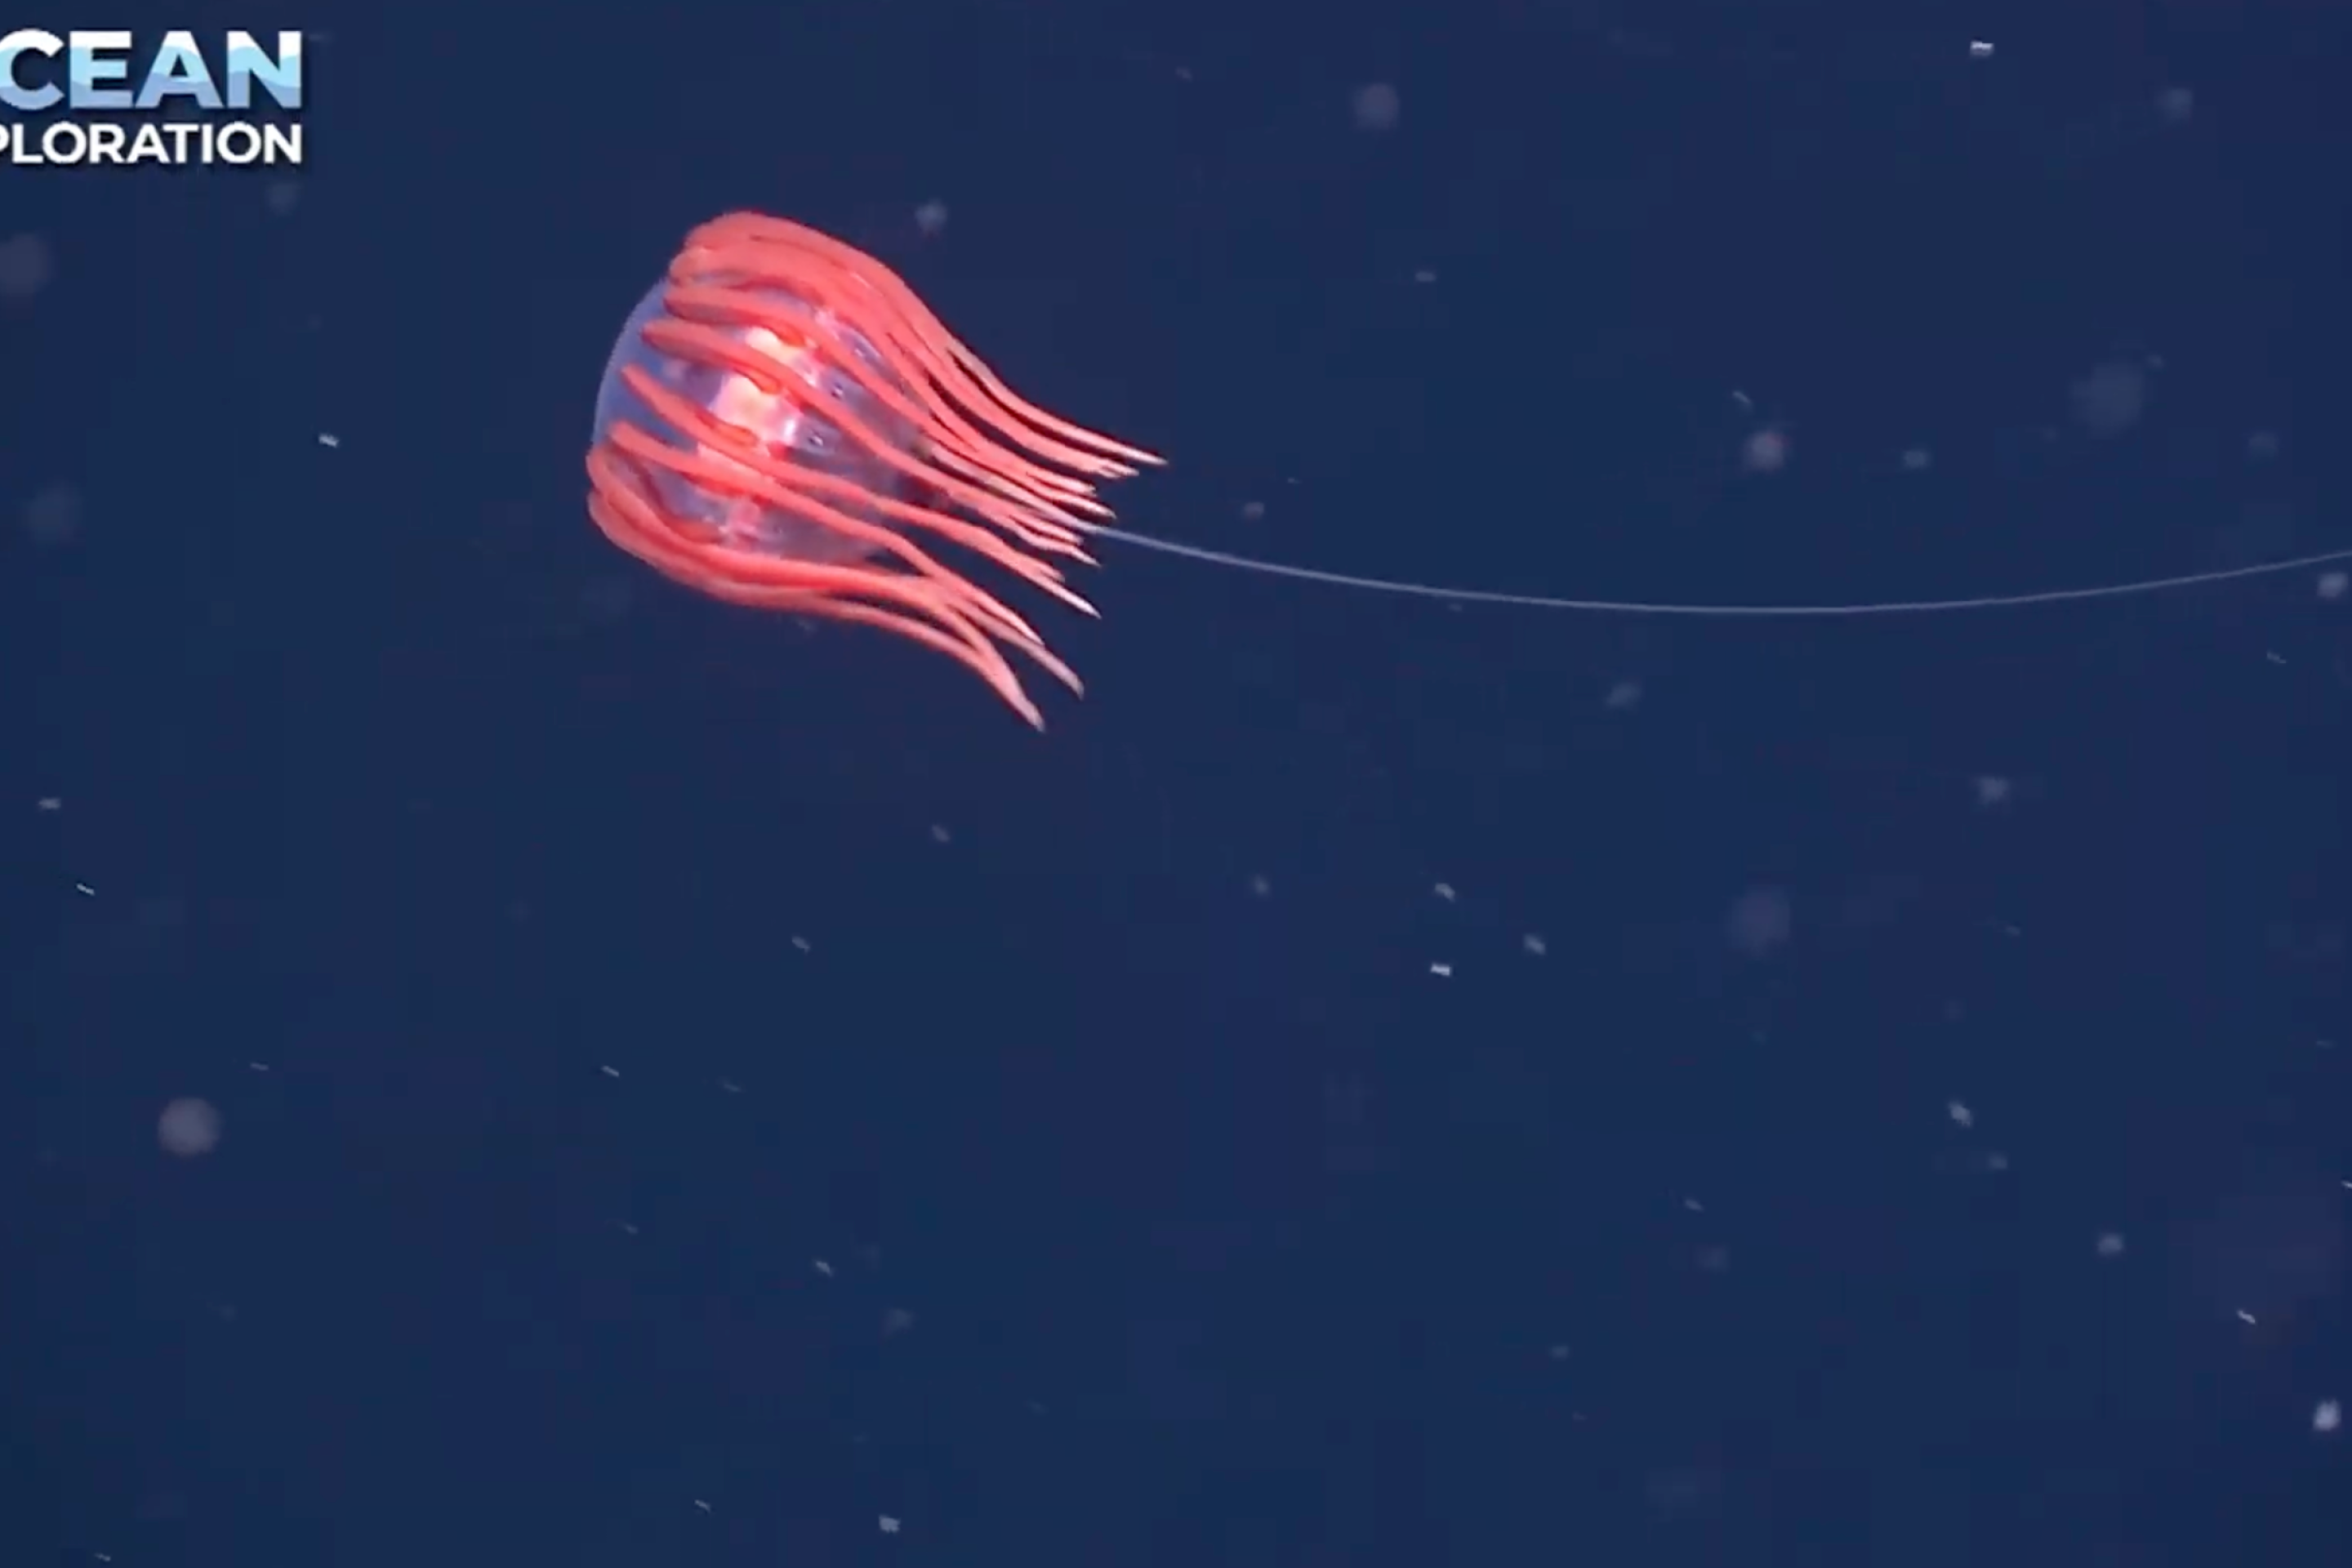 A mysterious jellyfish with one long tentacle